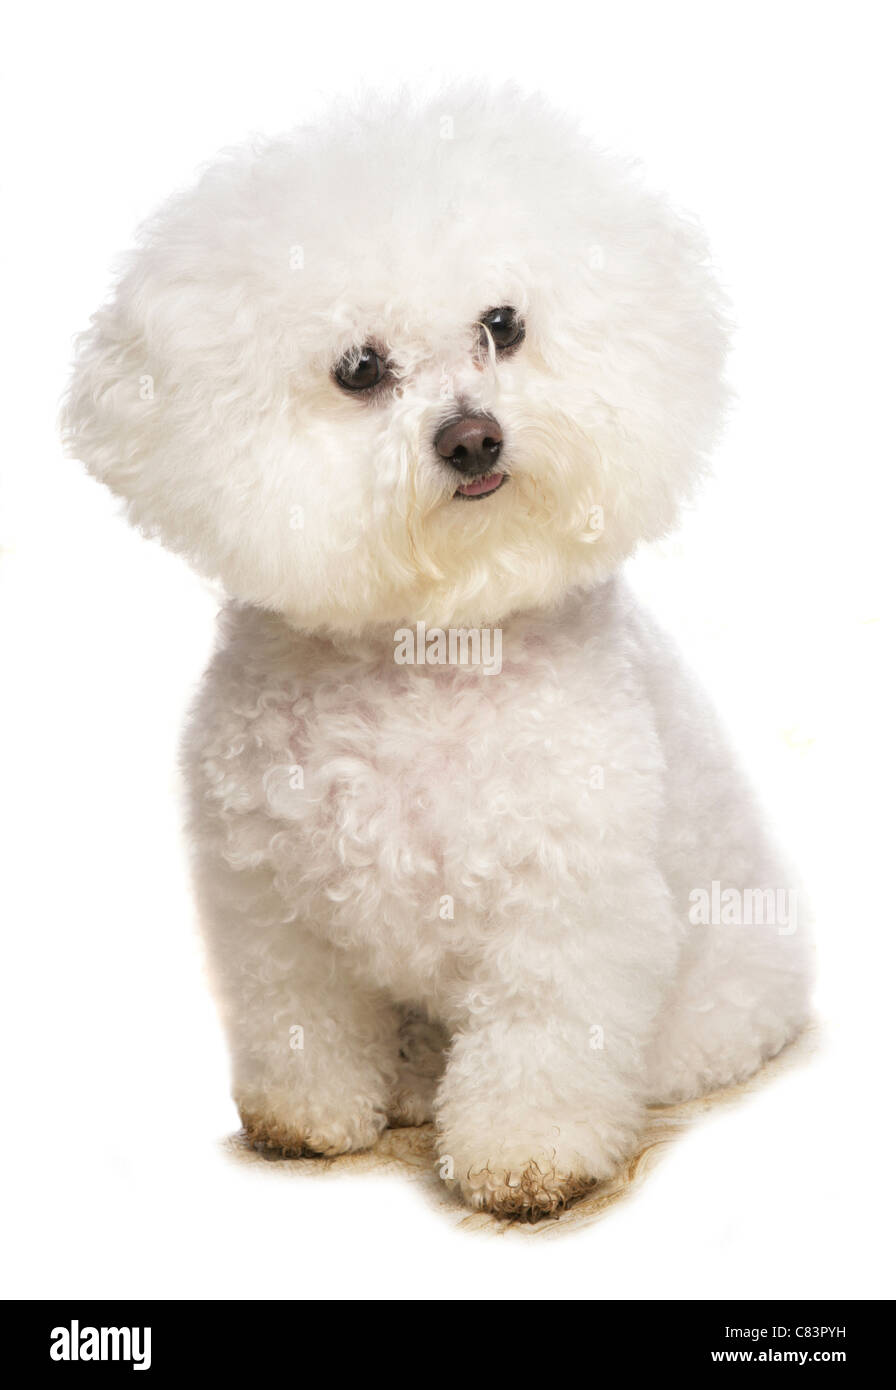 Bichon Frise. Adult dog sitting. Studio picture against a white background Stock Photo